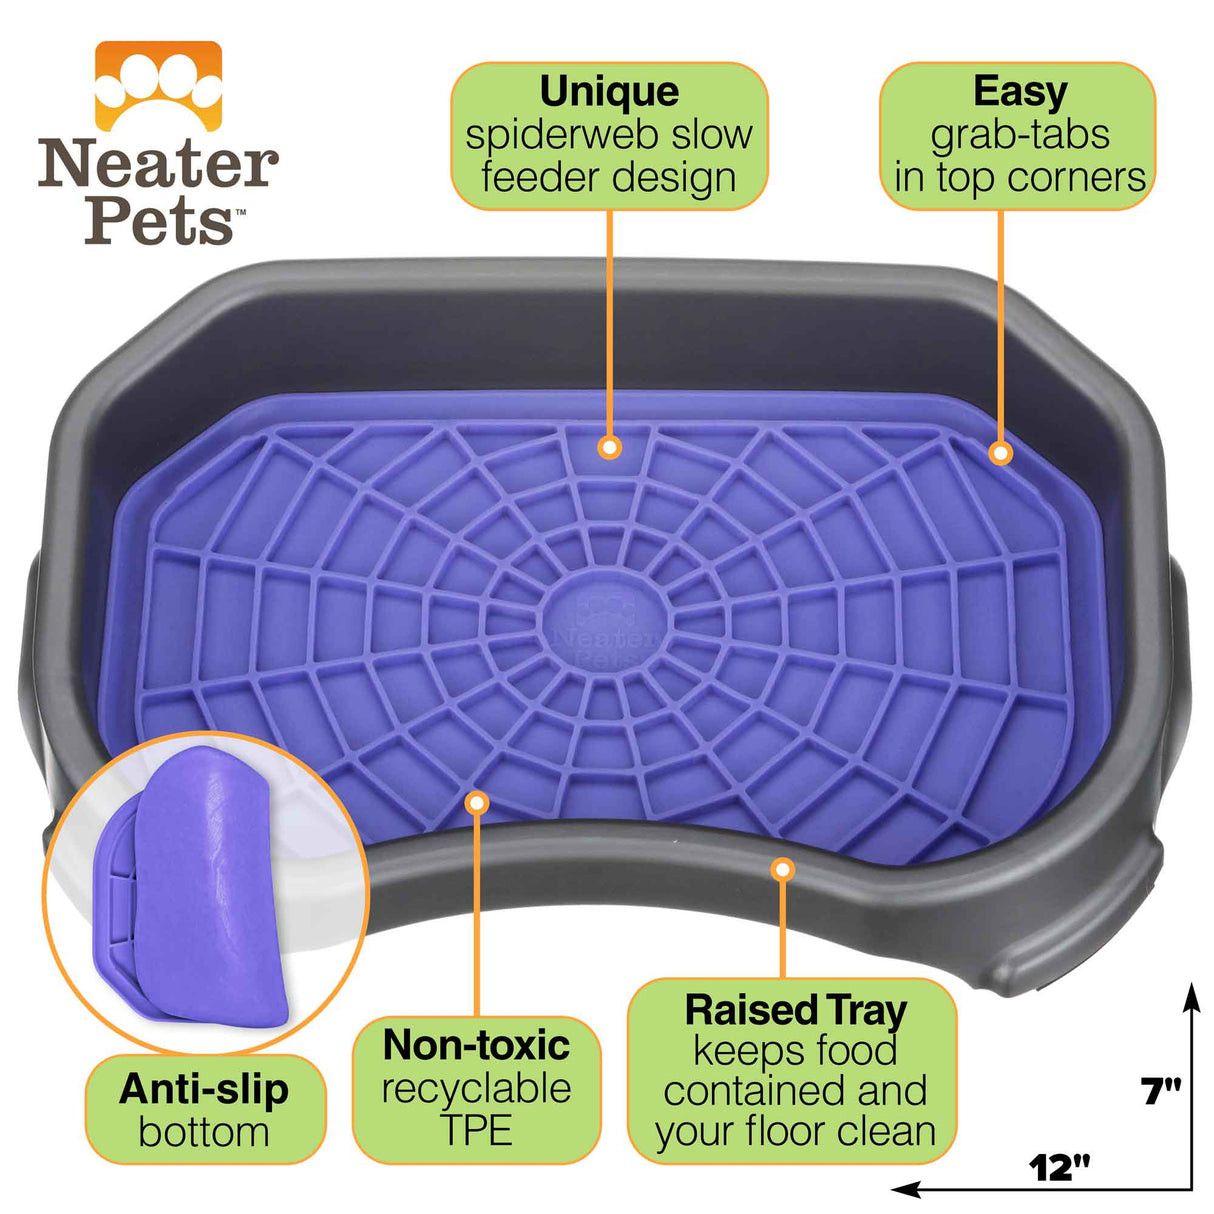 Neater Pets Neat-Lik Slow Feed Licking Pad for Dogs & Cats with Mess-Proof Tray, Purple Mat, Size: 13 x 8.5 x 2.5